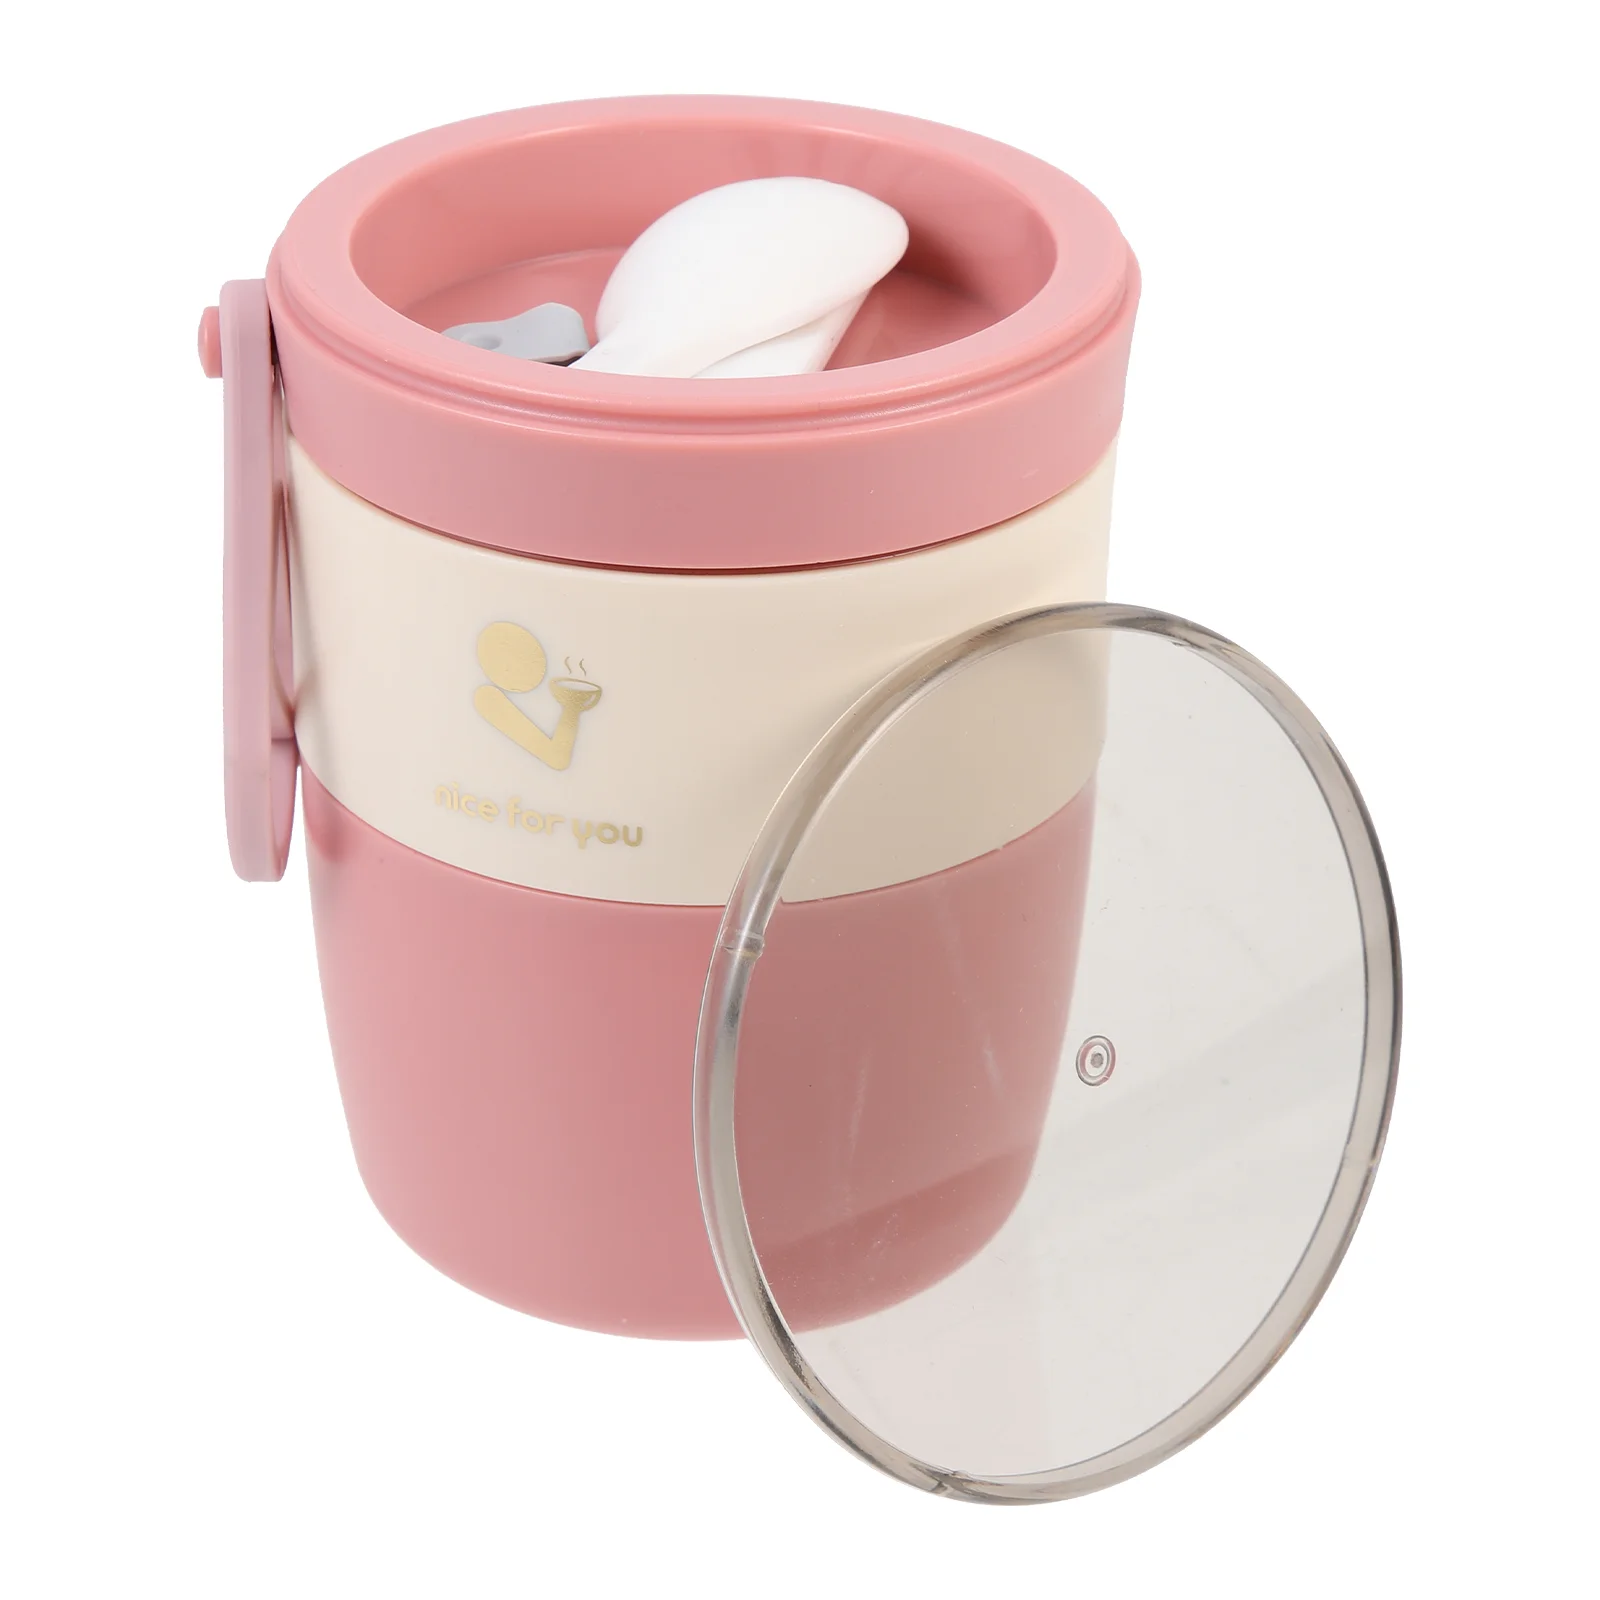 

Thermal Lunch Box Sealing Cereal Cup Food Portable Handheld Bento Leak Proof Containers